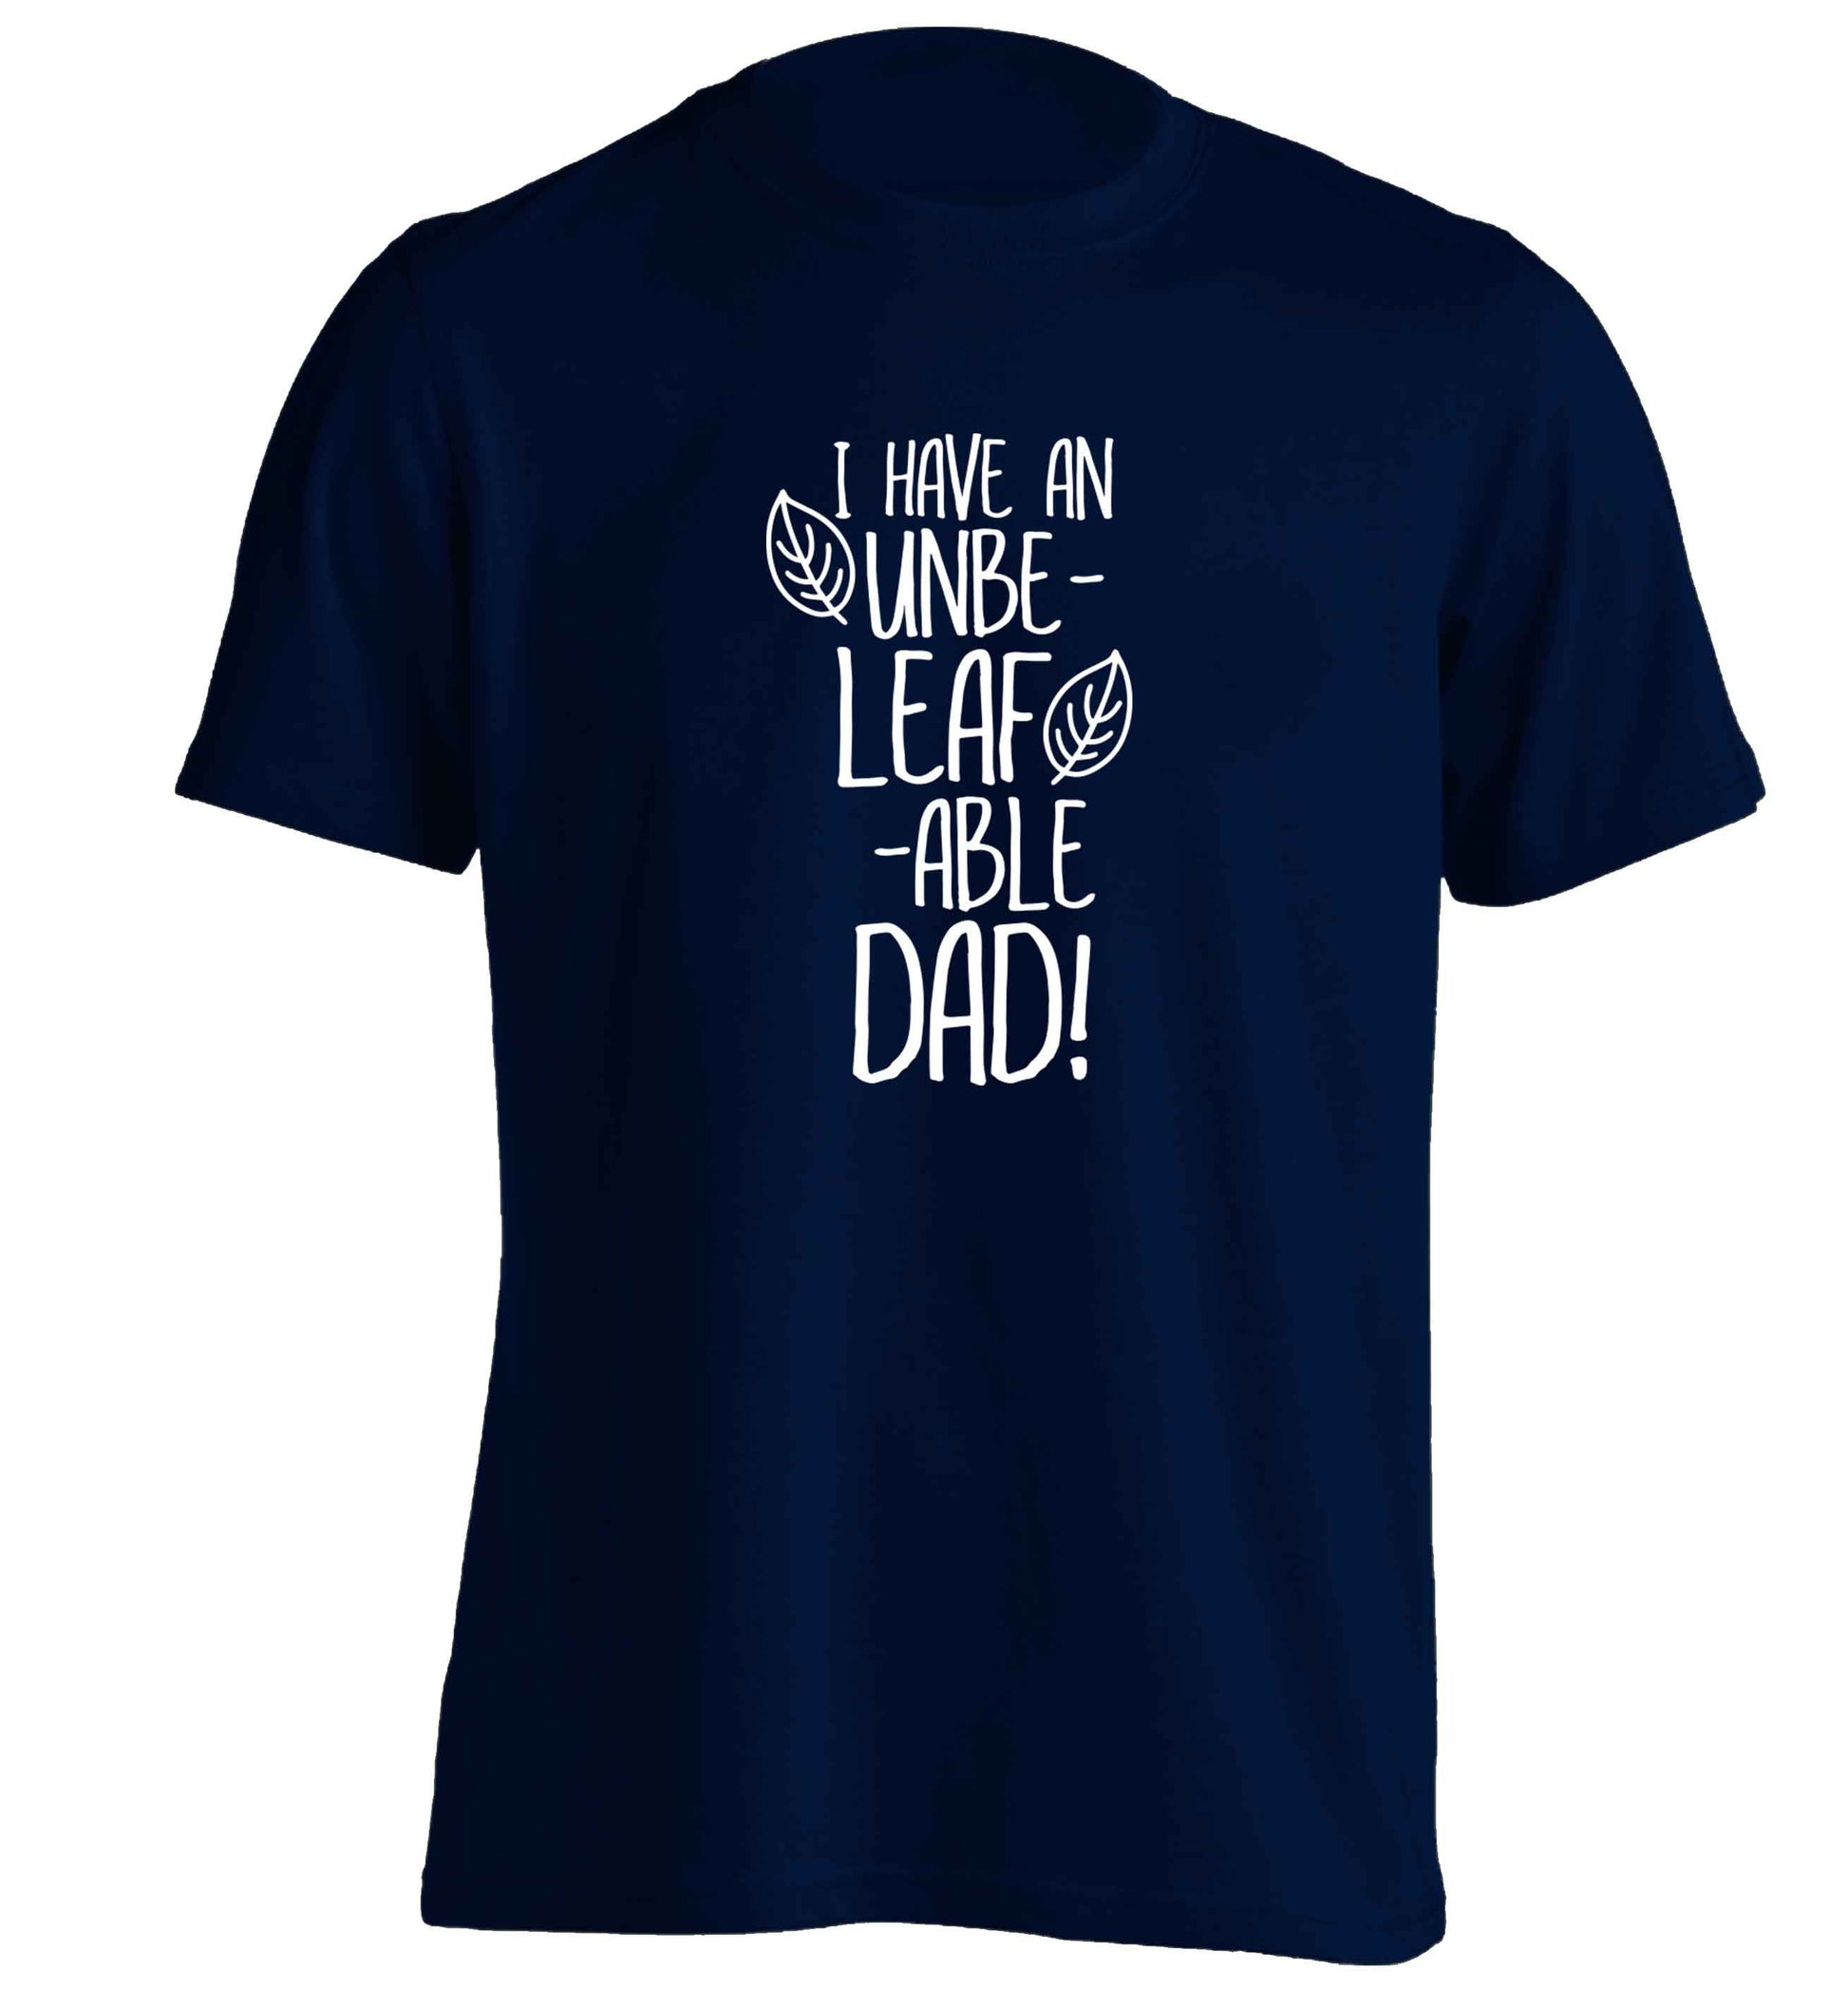 I have an unbe-leaf-able dad adults unisex navy Tshirt 2XL